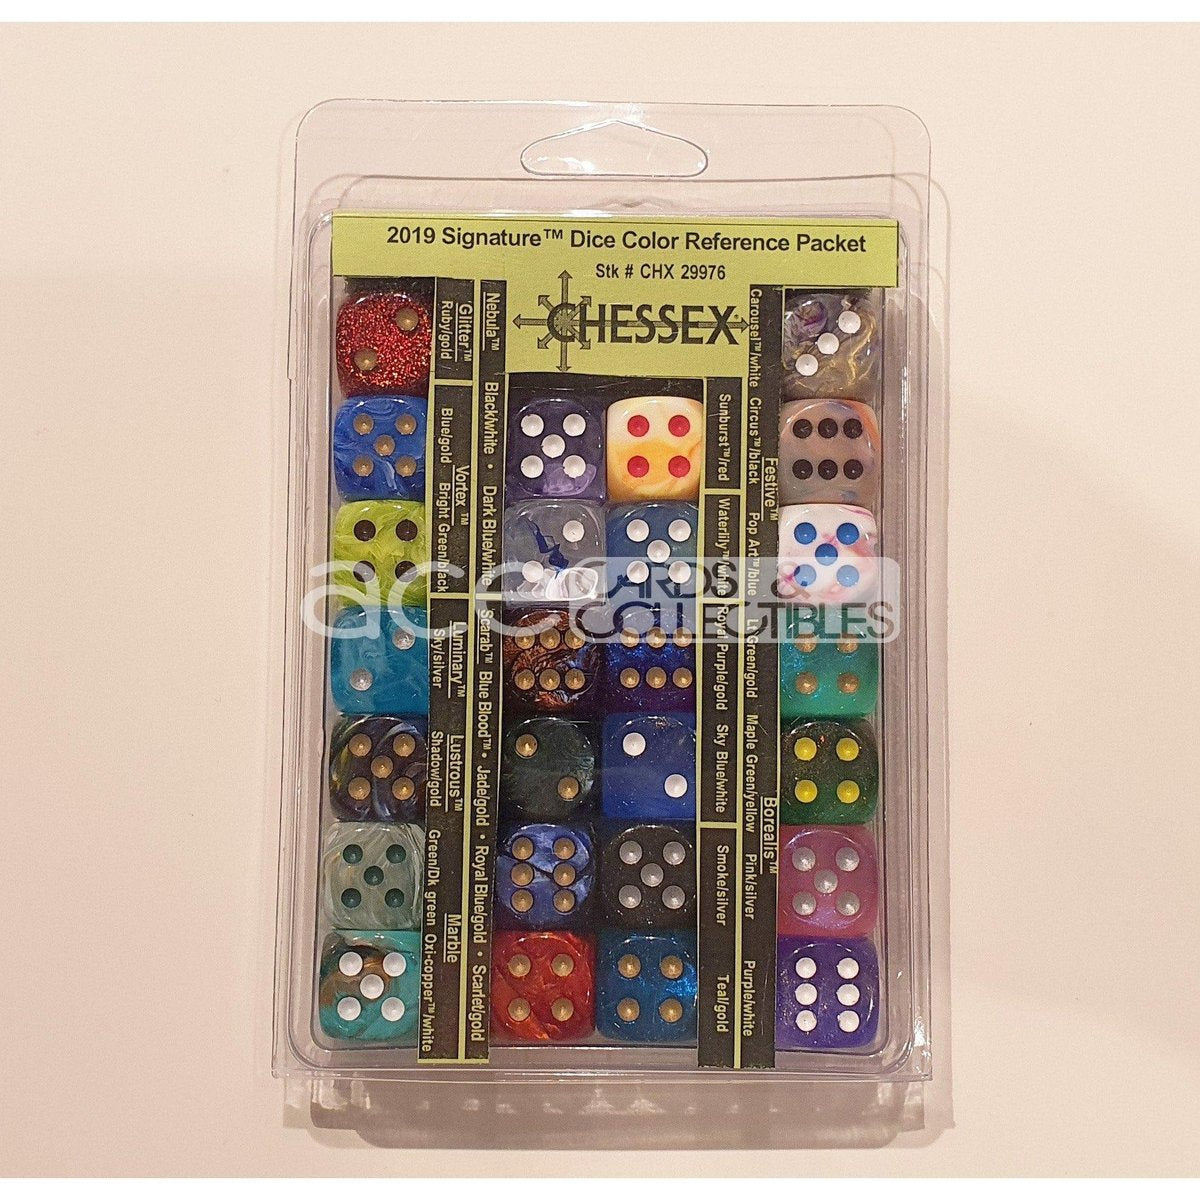 Chessex 2019 Signature™ Color Reference Packet 26pcs Dice [CHX29976]-Chessex-Ace Cards &amp; Collectibles